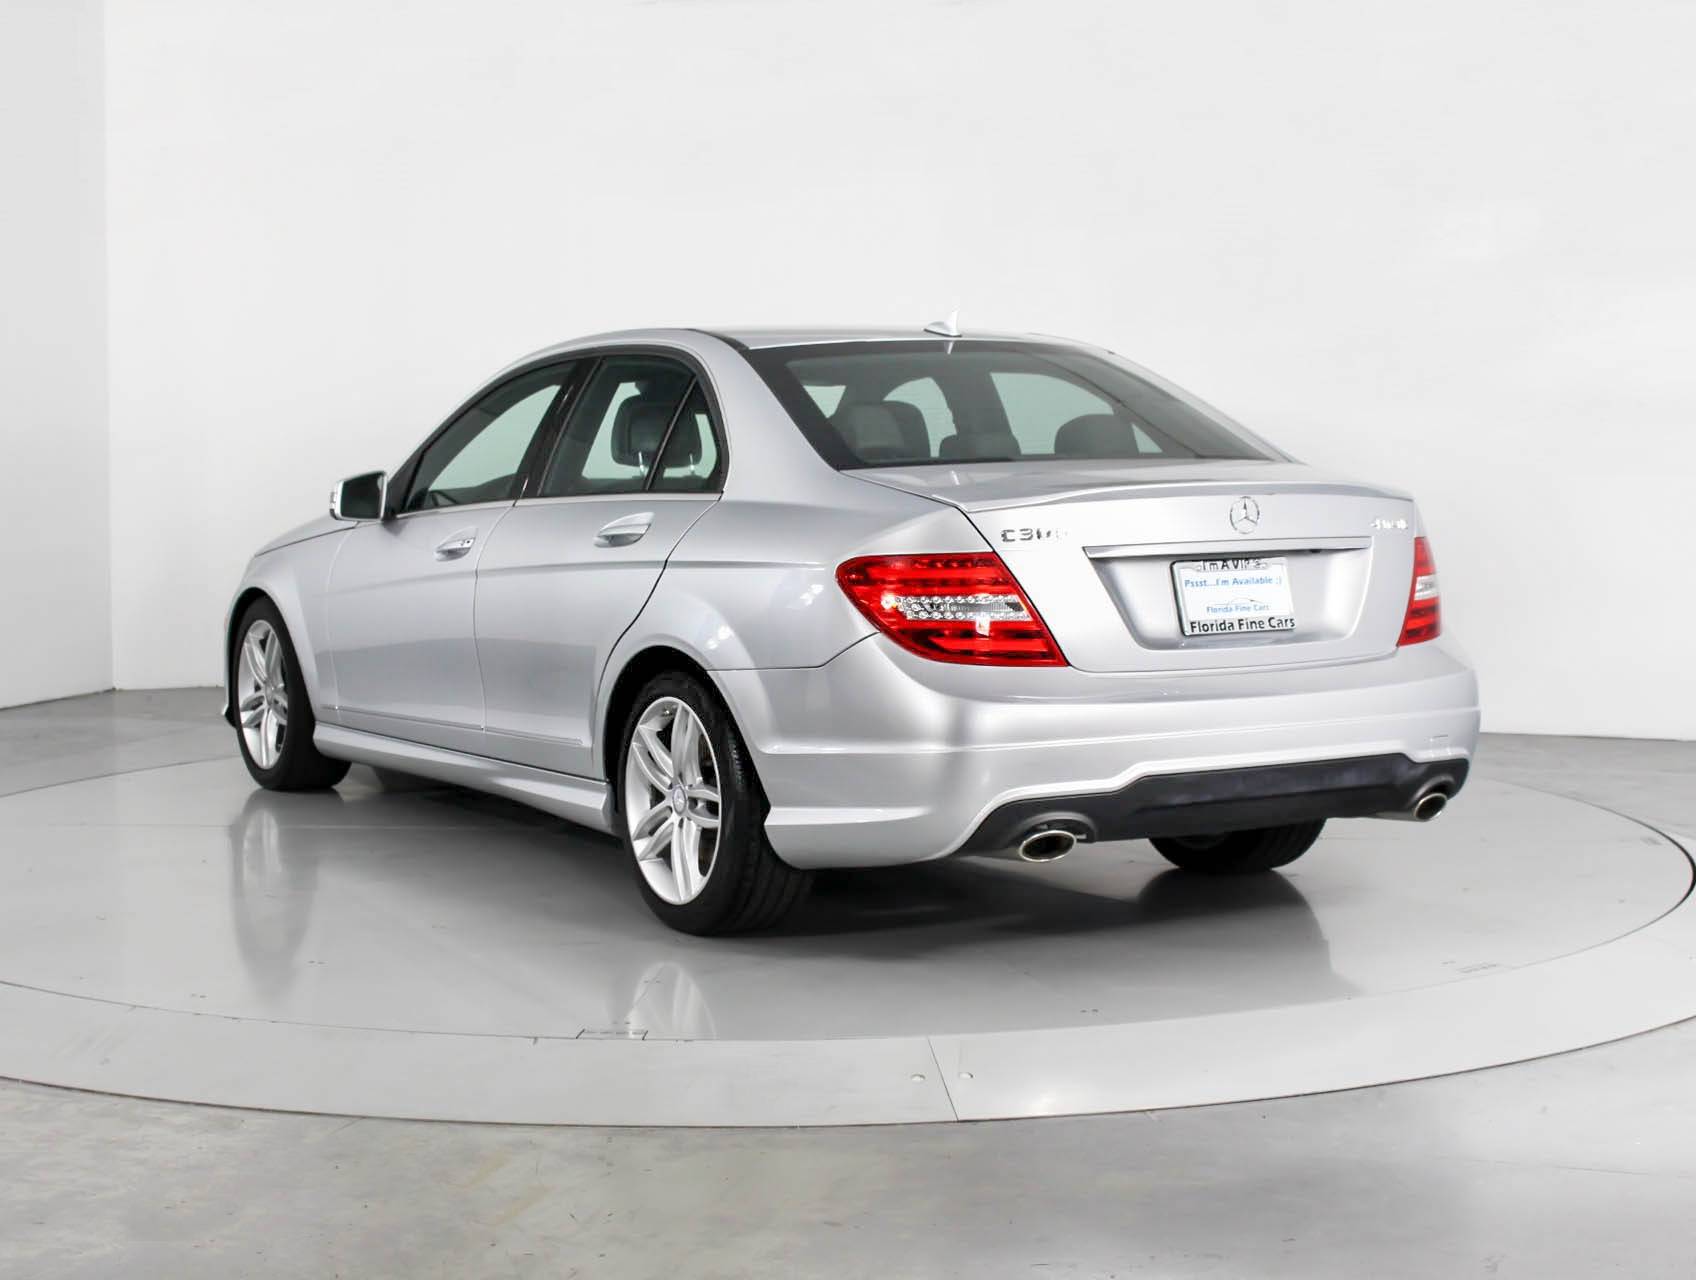 Florida Fine Cars - Used MERCEDES-BENZ C CLASS 2013 WEST PALM C300 4MATIC